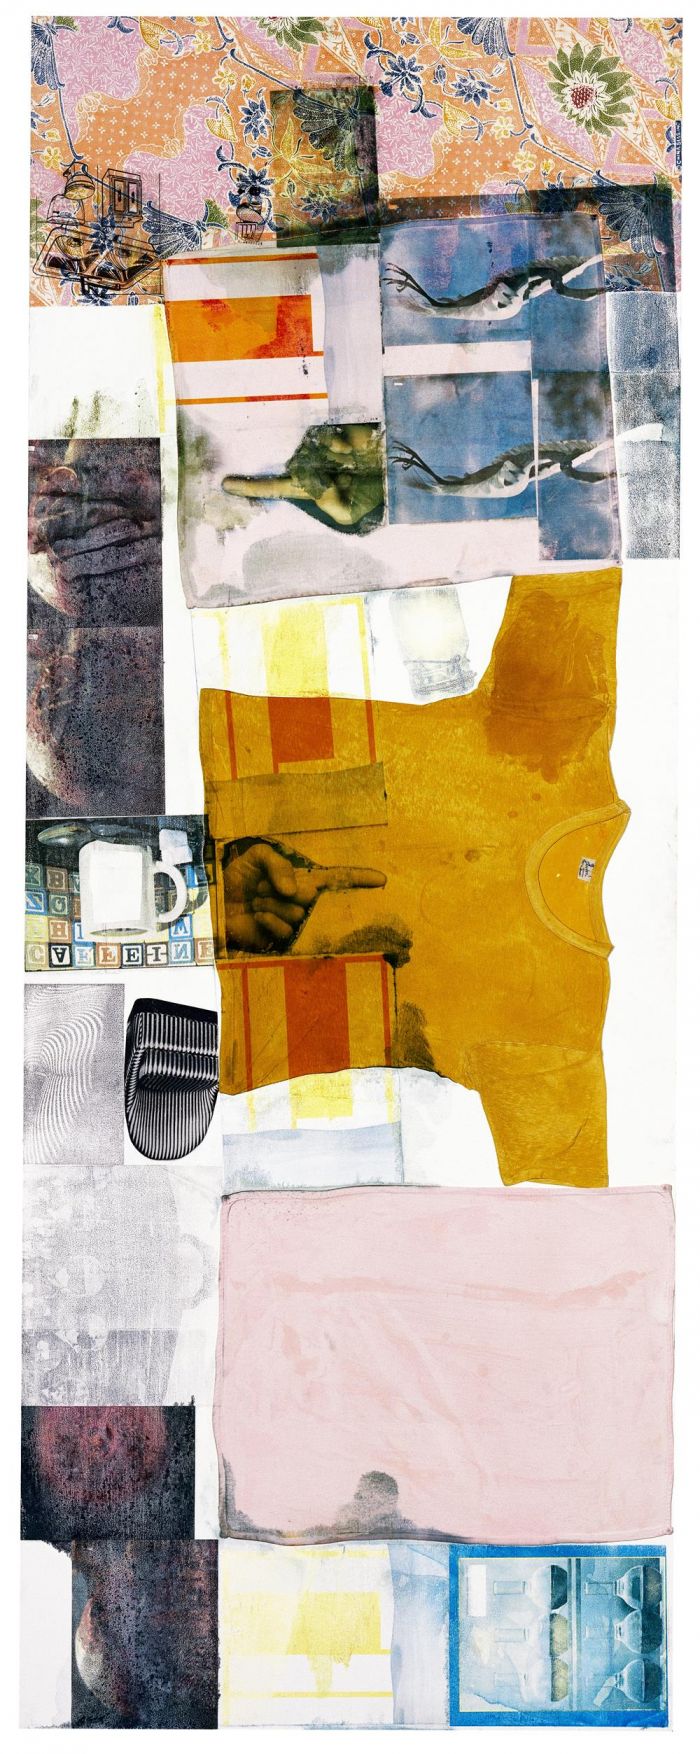 Rauschenberg in China pre-opening image for media 1